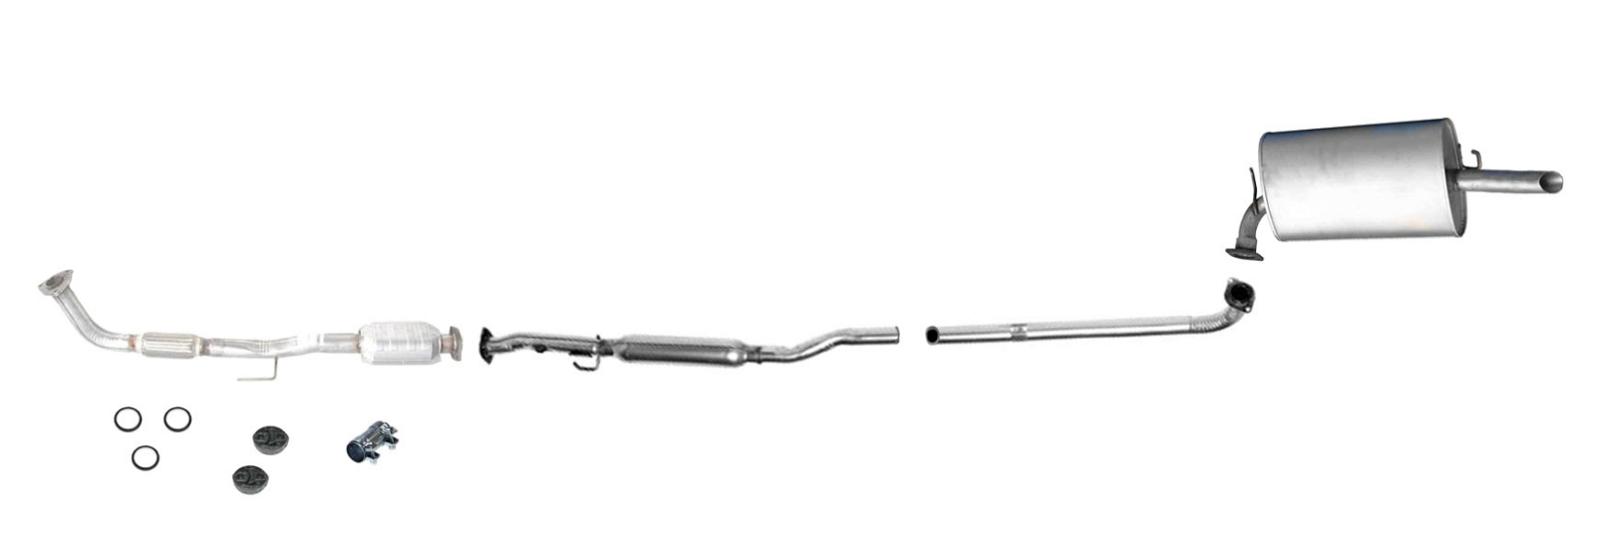 97-99 Camry 2.2 Converter Muffler Pipe Exhaust System With Federal